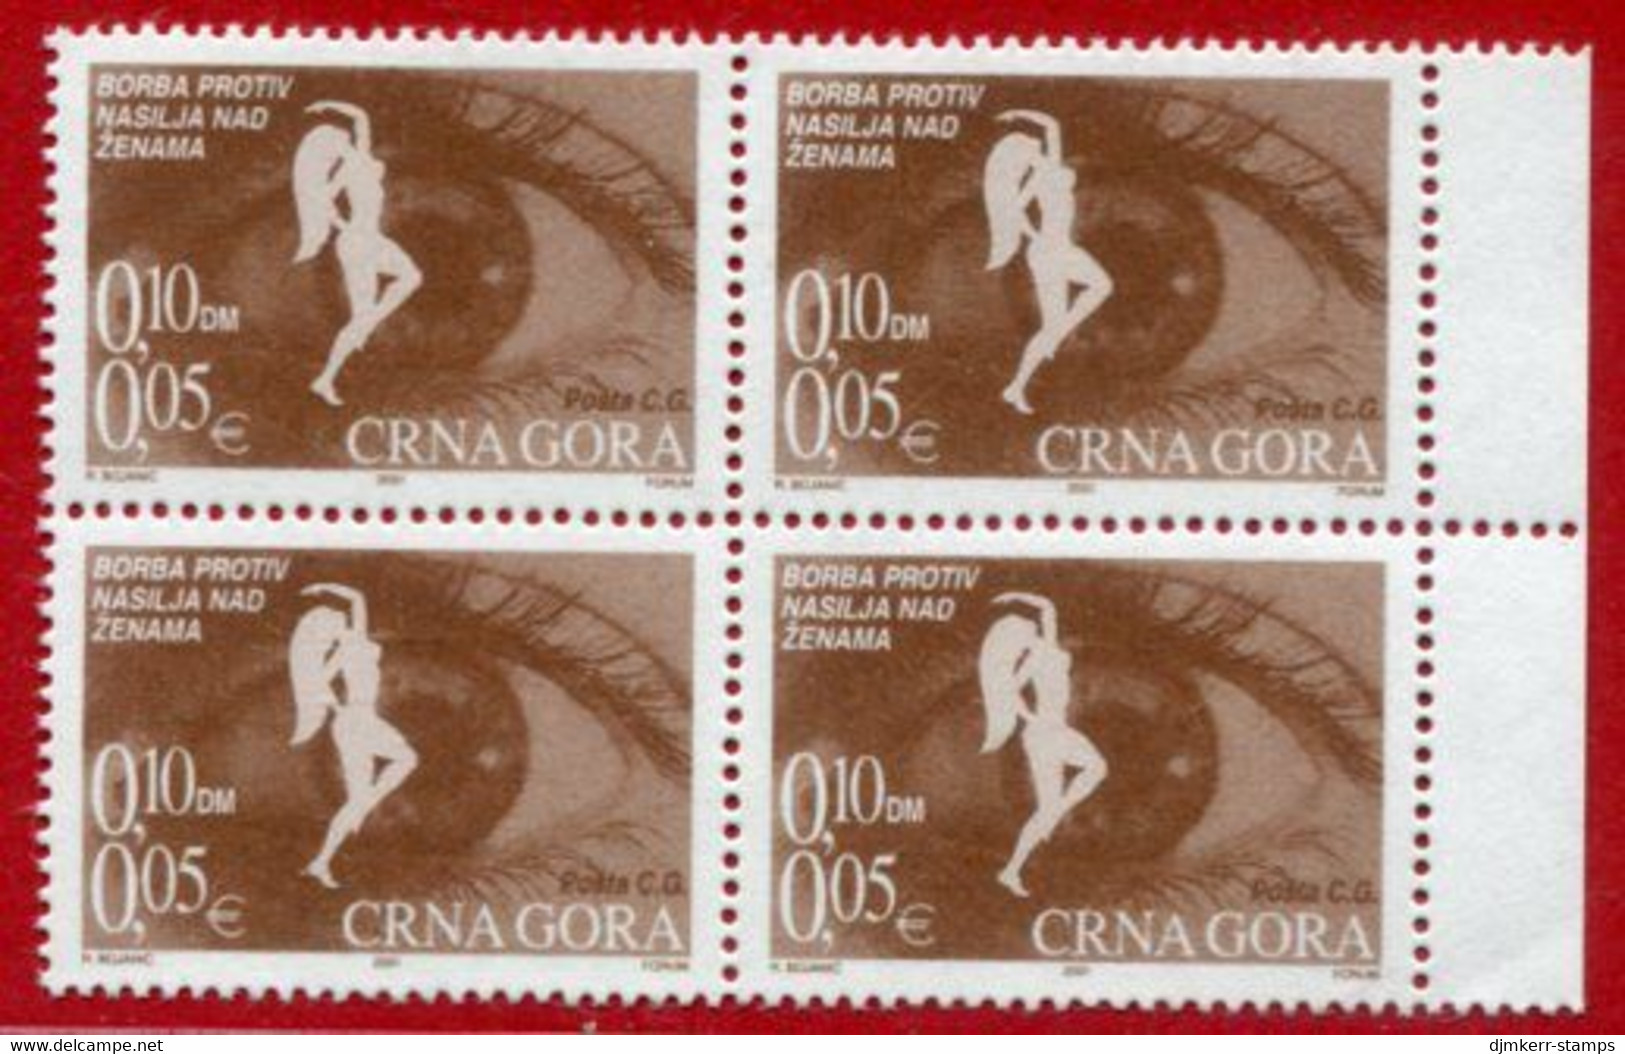 MONTENEGRO 2001 Fight Against Violence Over Women Monochrome Stamp Block Of 4 MNH / **. - Montenegro